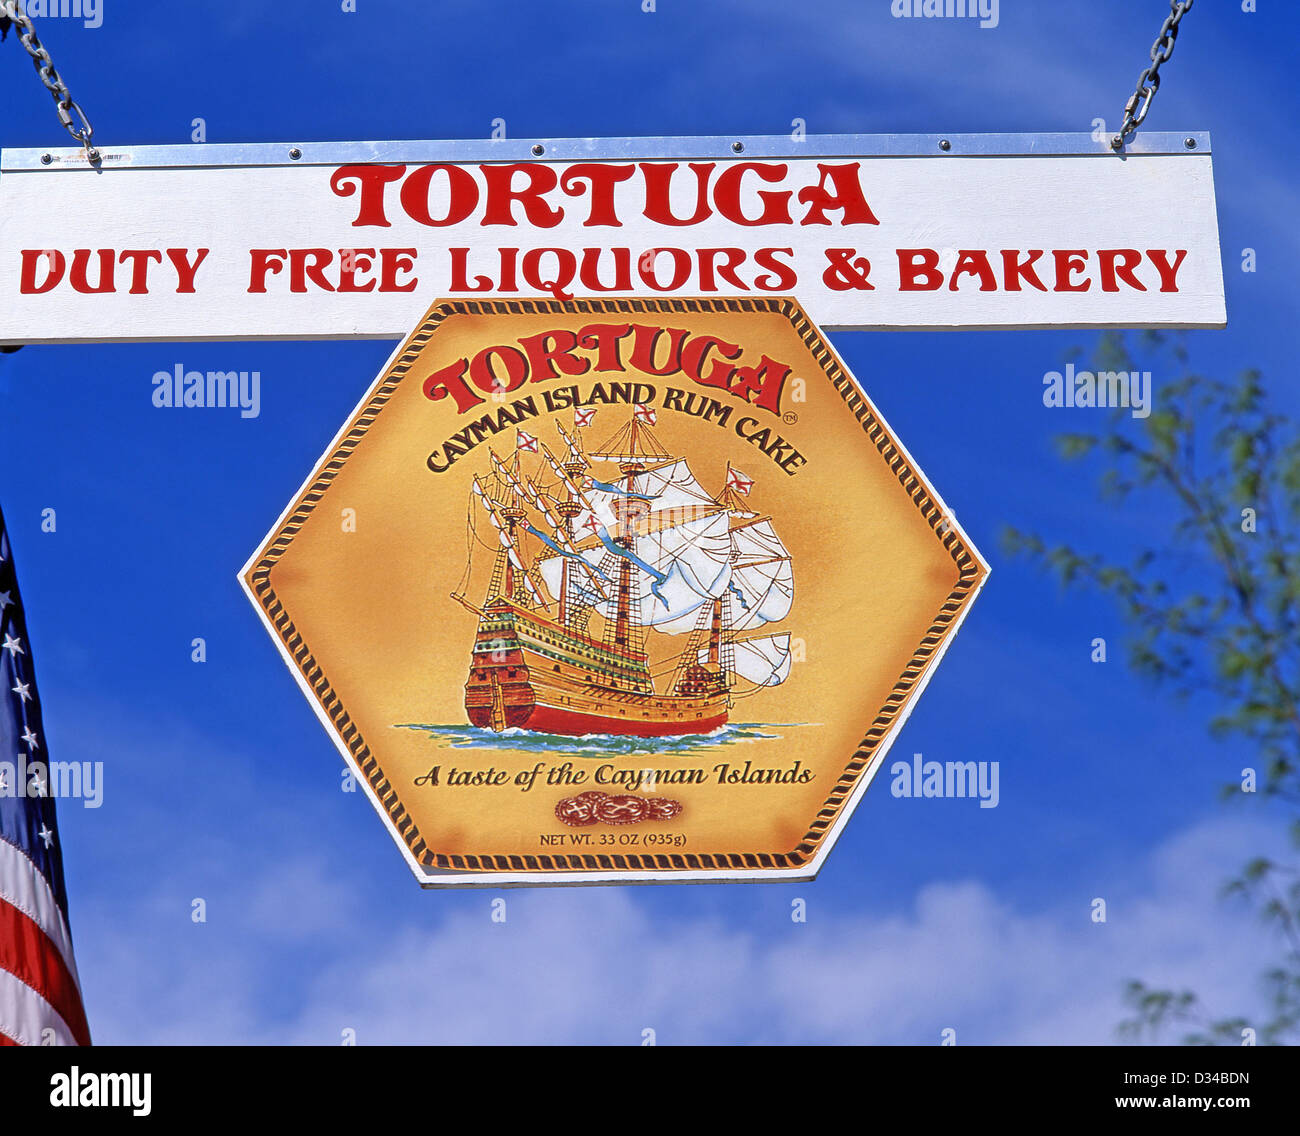 Bakery shop Tortuga rum cake sign in George Town, Grand Cayman, Cayman Islands, Greater Antilles Caribbean Stock Photo